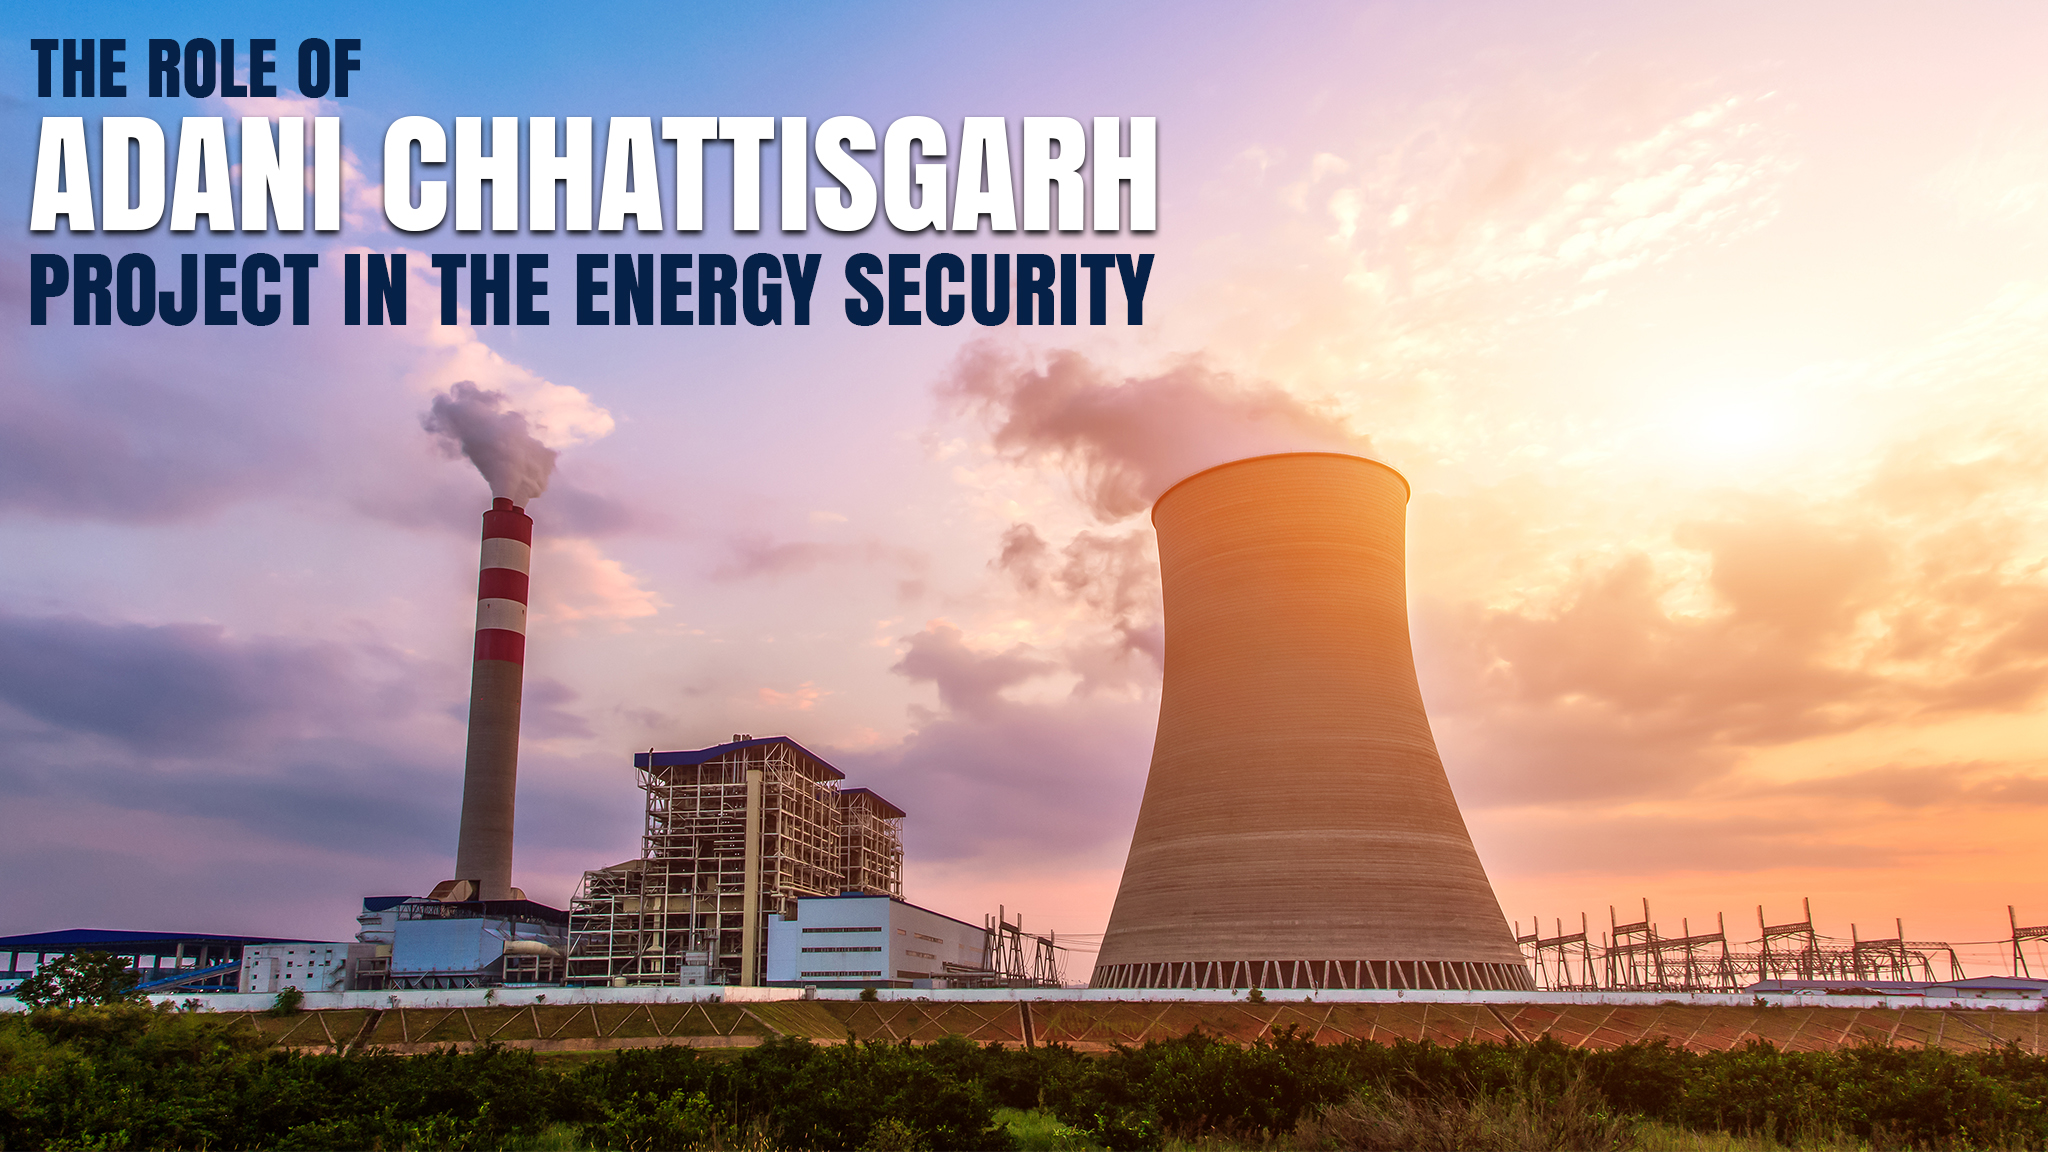 The role of Adani Chhattisgarh project in the energy security